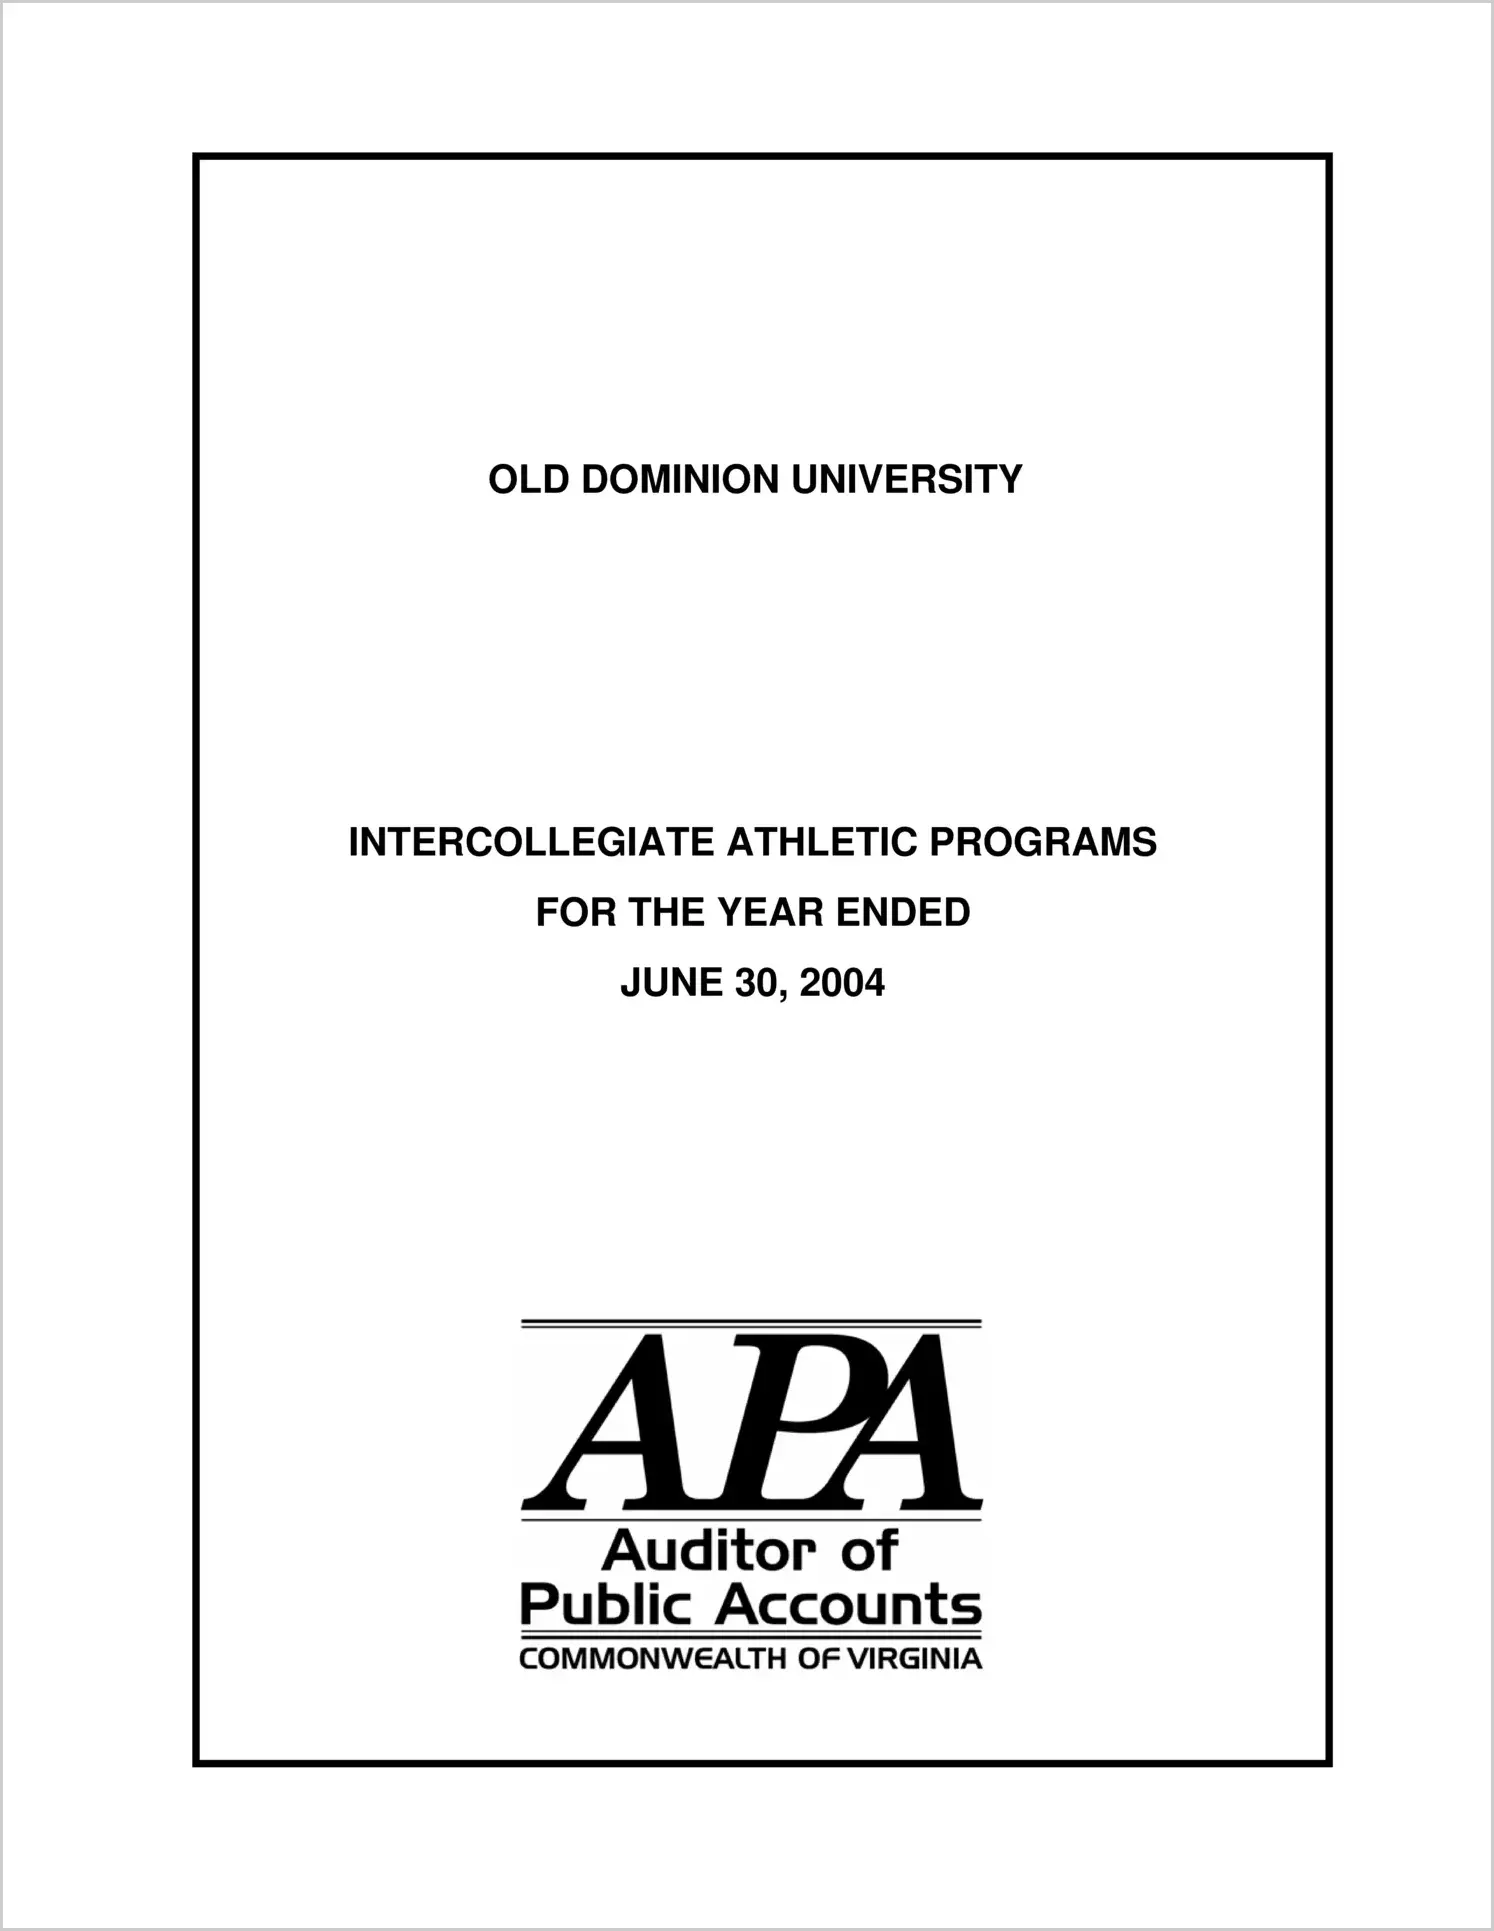 Old Dominion University Intercollegiate Athletic Programs for the year ended June 30, 2004